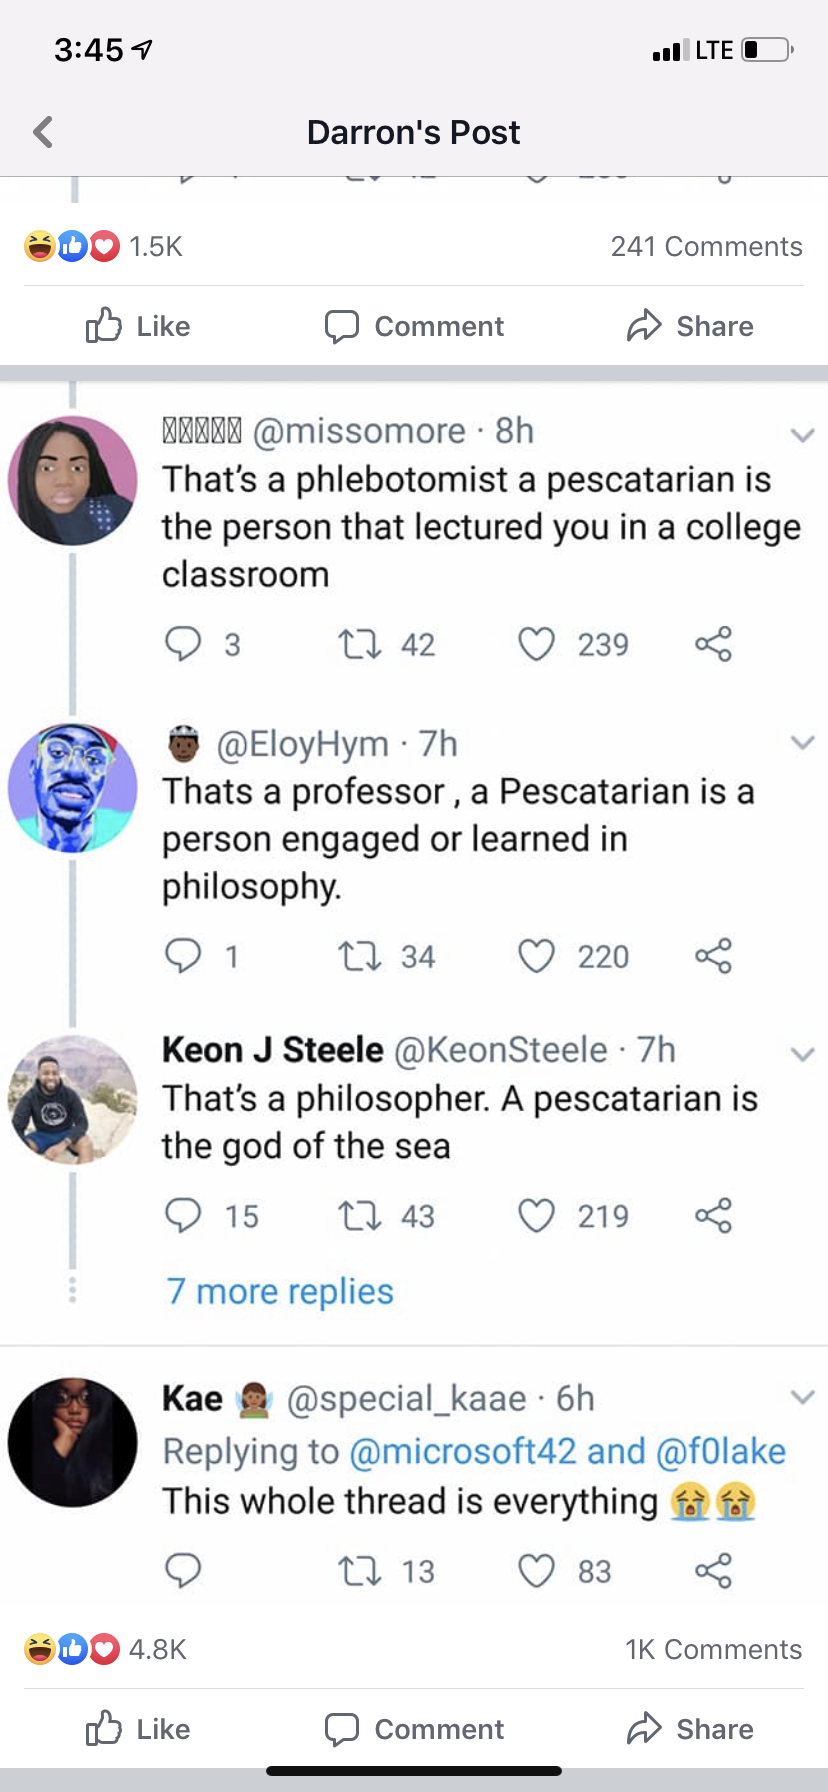 That's a phlebotomist a pescatarian is the person that lectured you in a college classroom Thats a professor, a Pescatarian is a person engaged or learned in philosophy 01 1